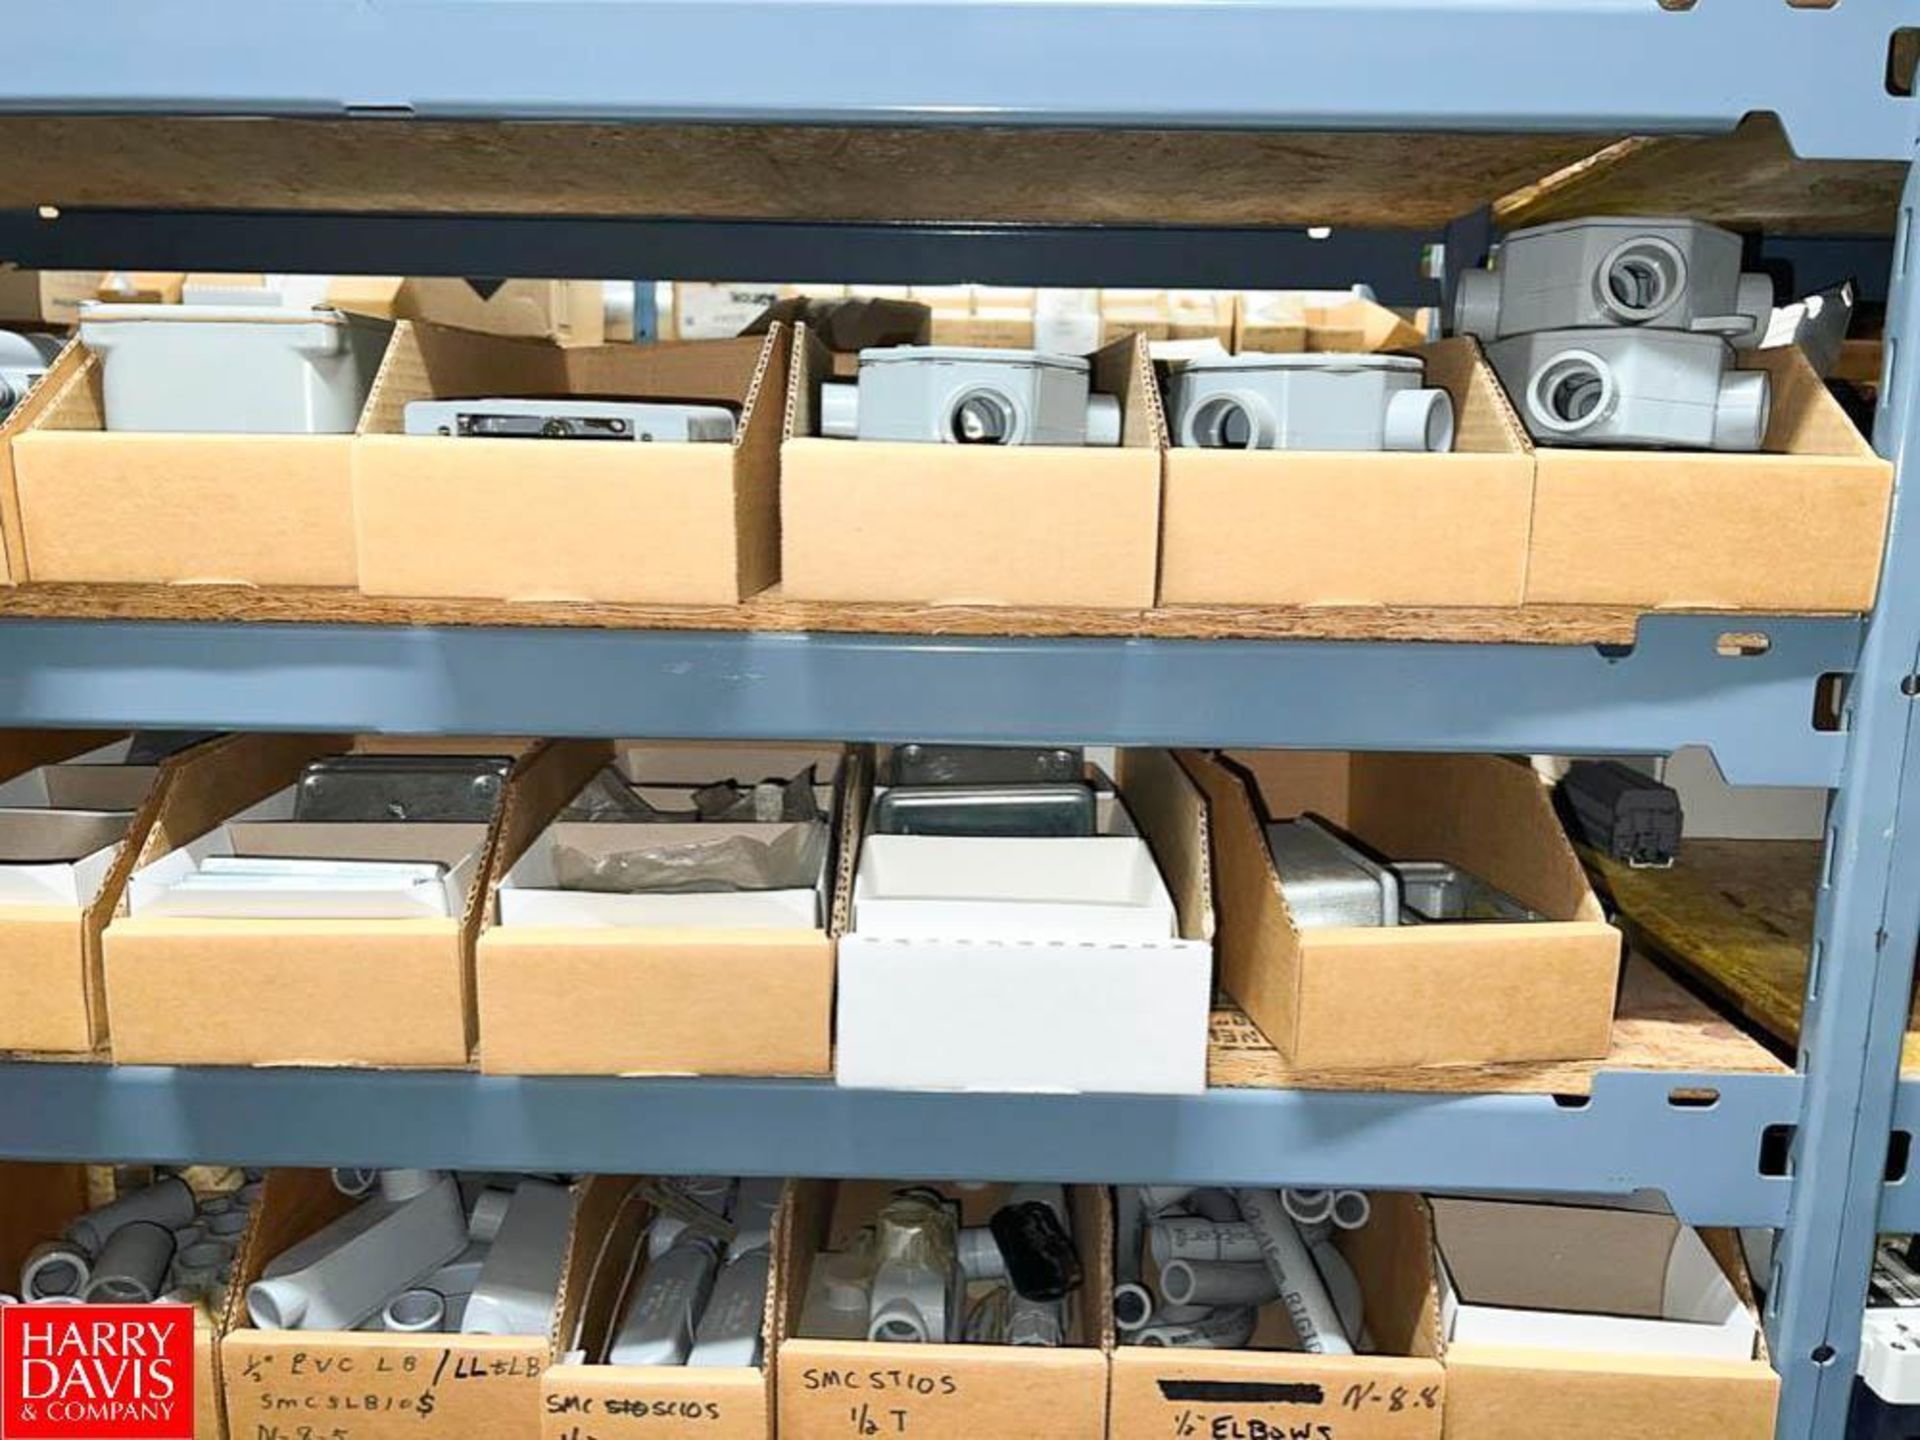 Assorted Electrical Equipment, Including: Circuit Breakers, Conduit, Conduit Adapters and Enclosures - Image 27 of 46